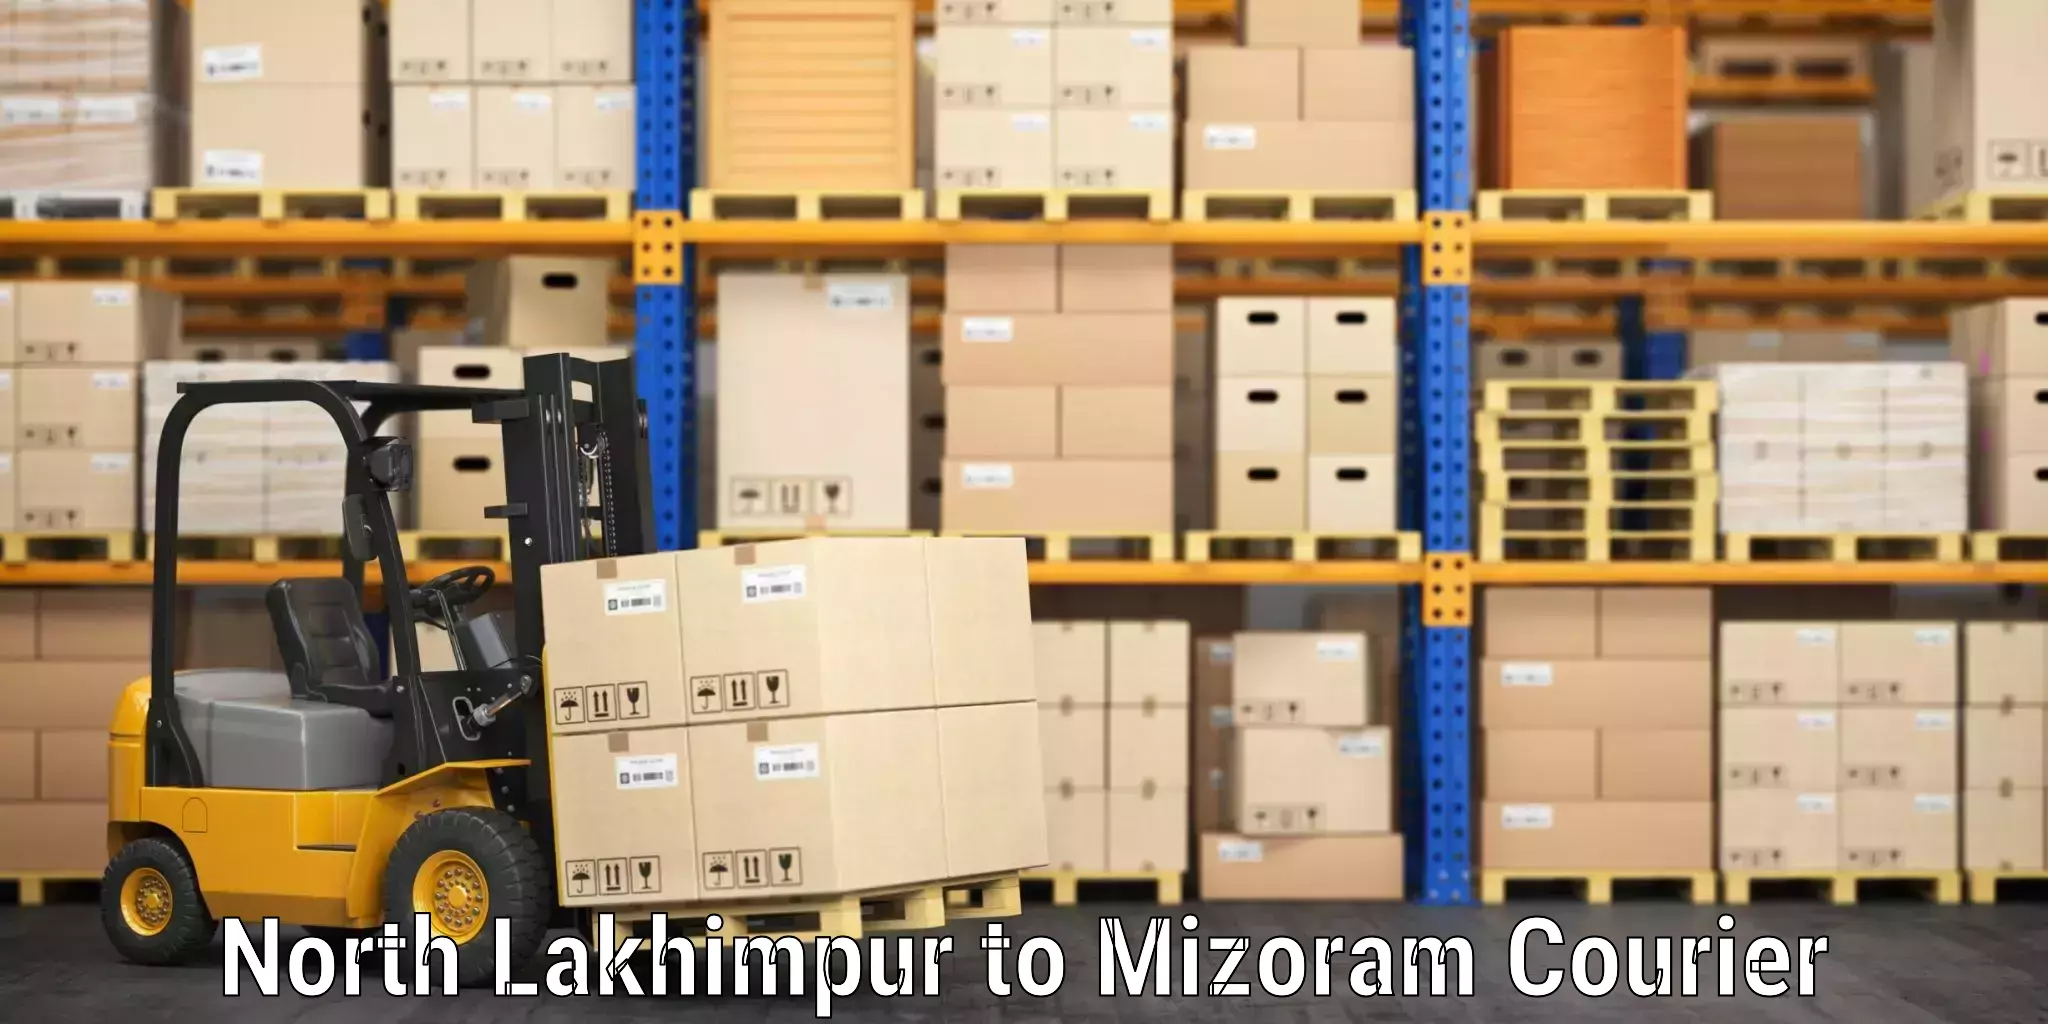 Luggage delivery network North Lakhimpur to Mizoram